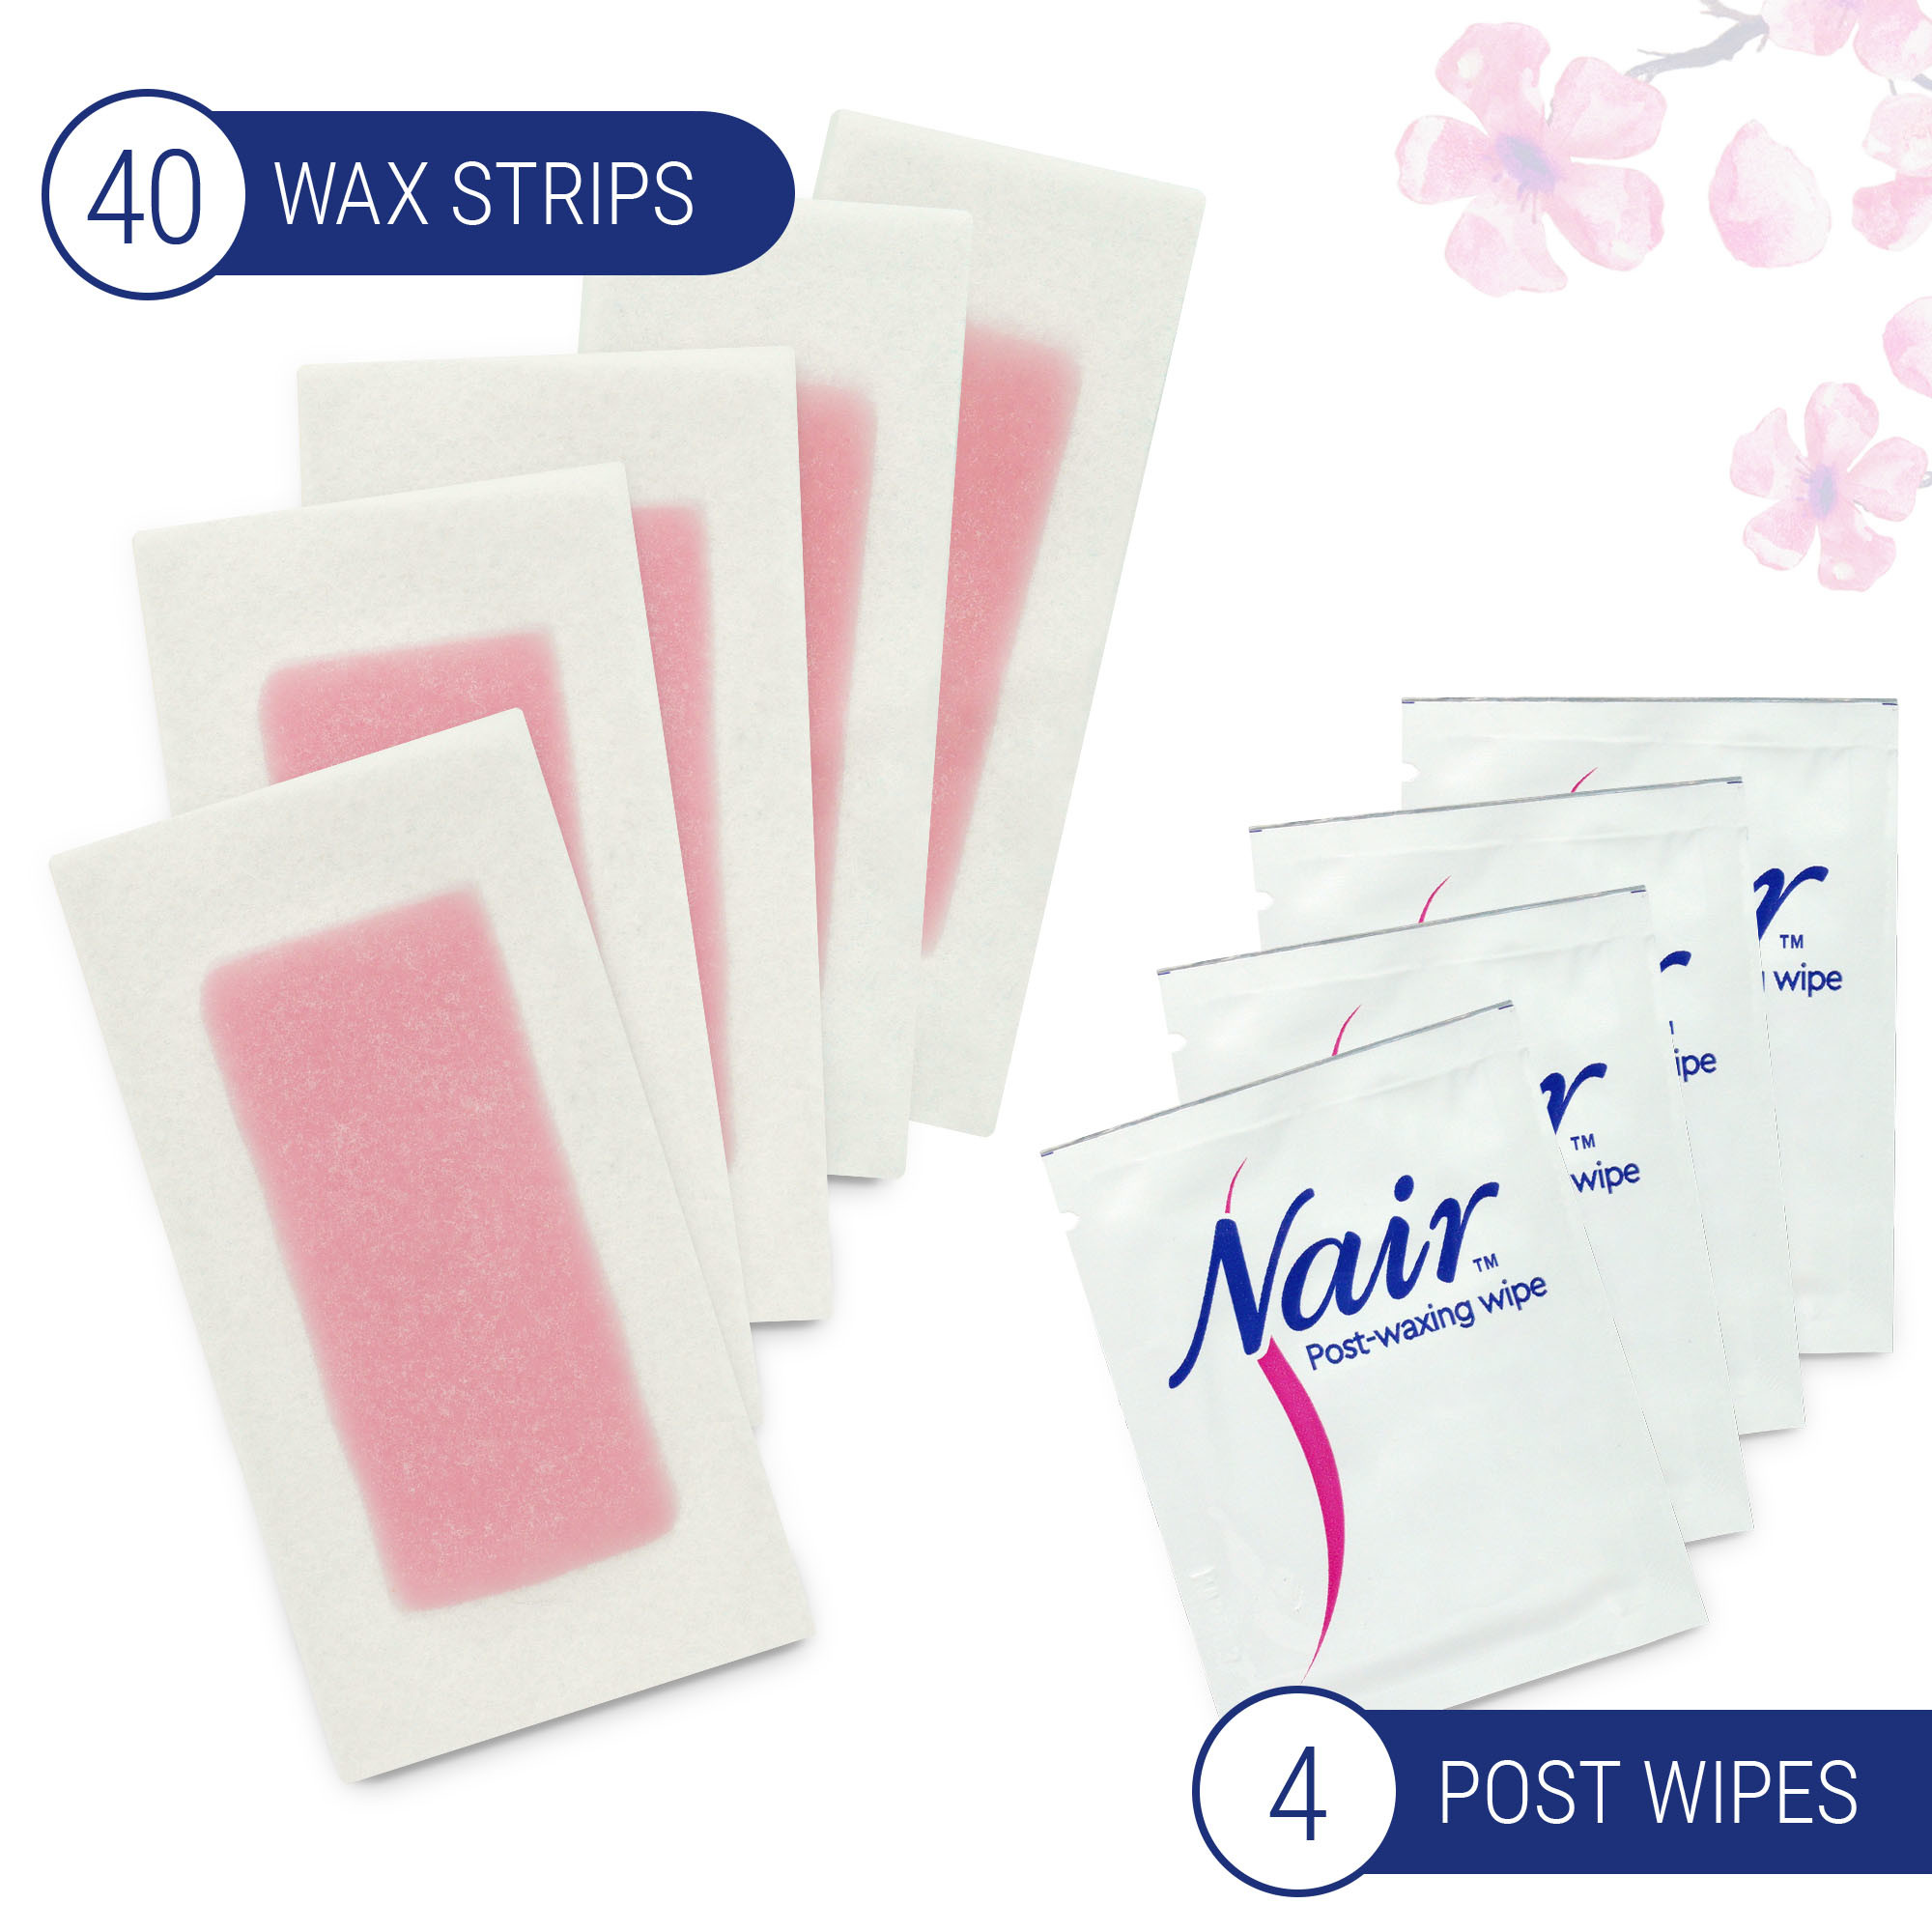 Nair Hair Remover Wax Ready Strips, Face and Bikini Hair Removal Wax Strips, 40 Count - image 5 of 12